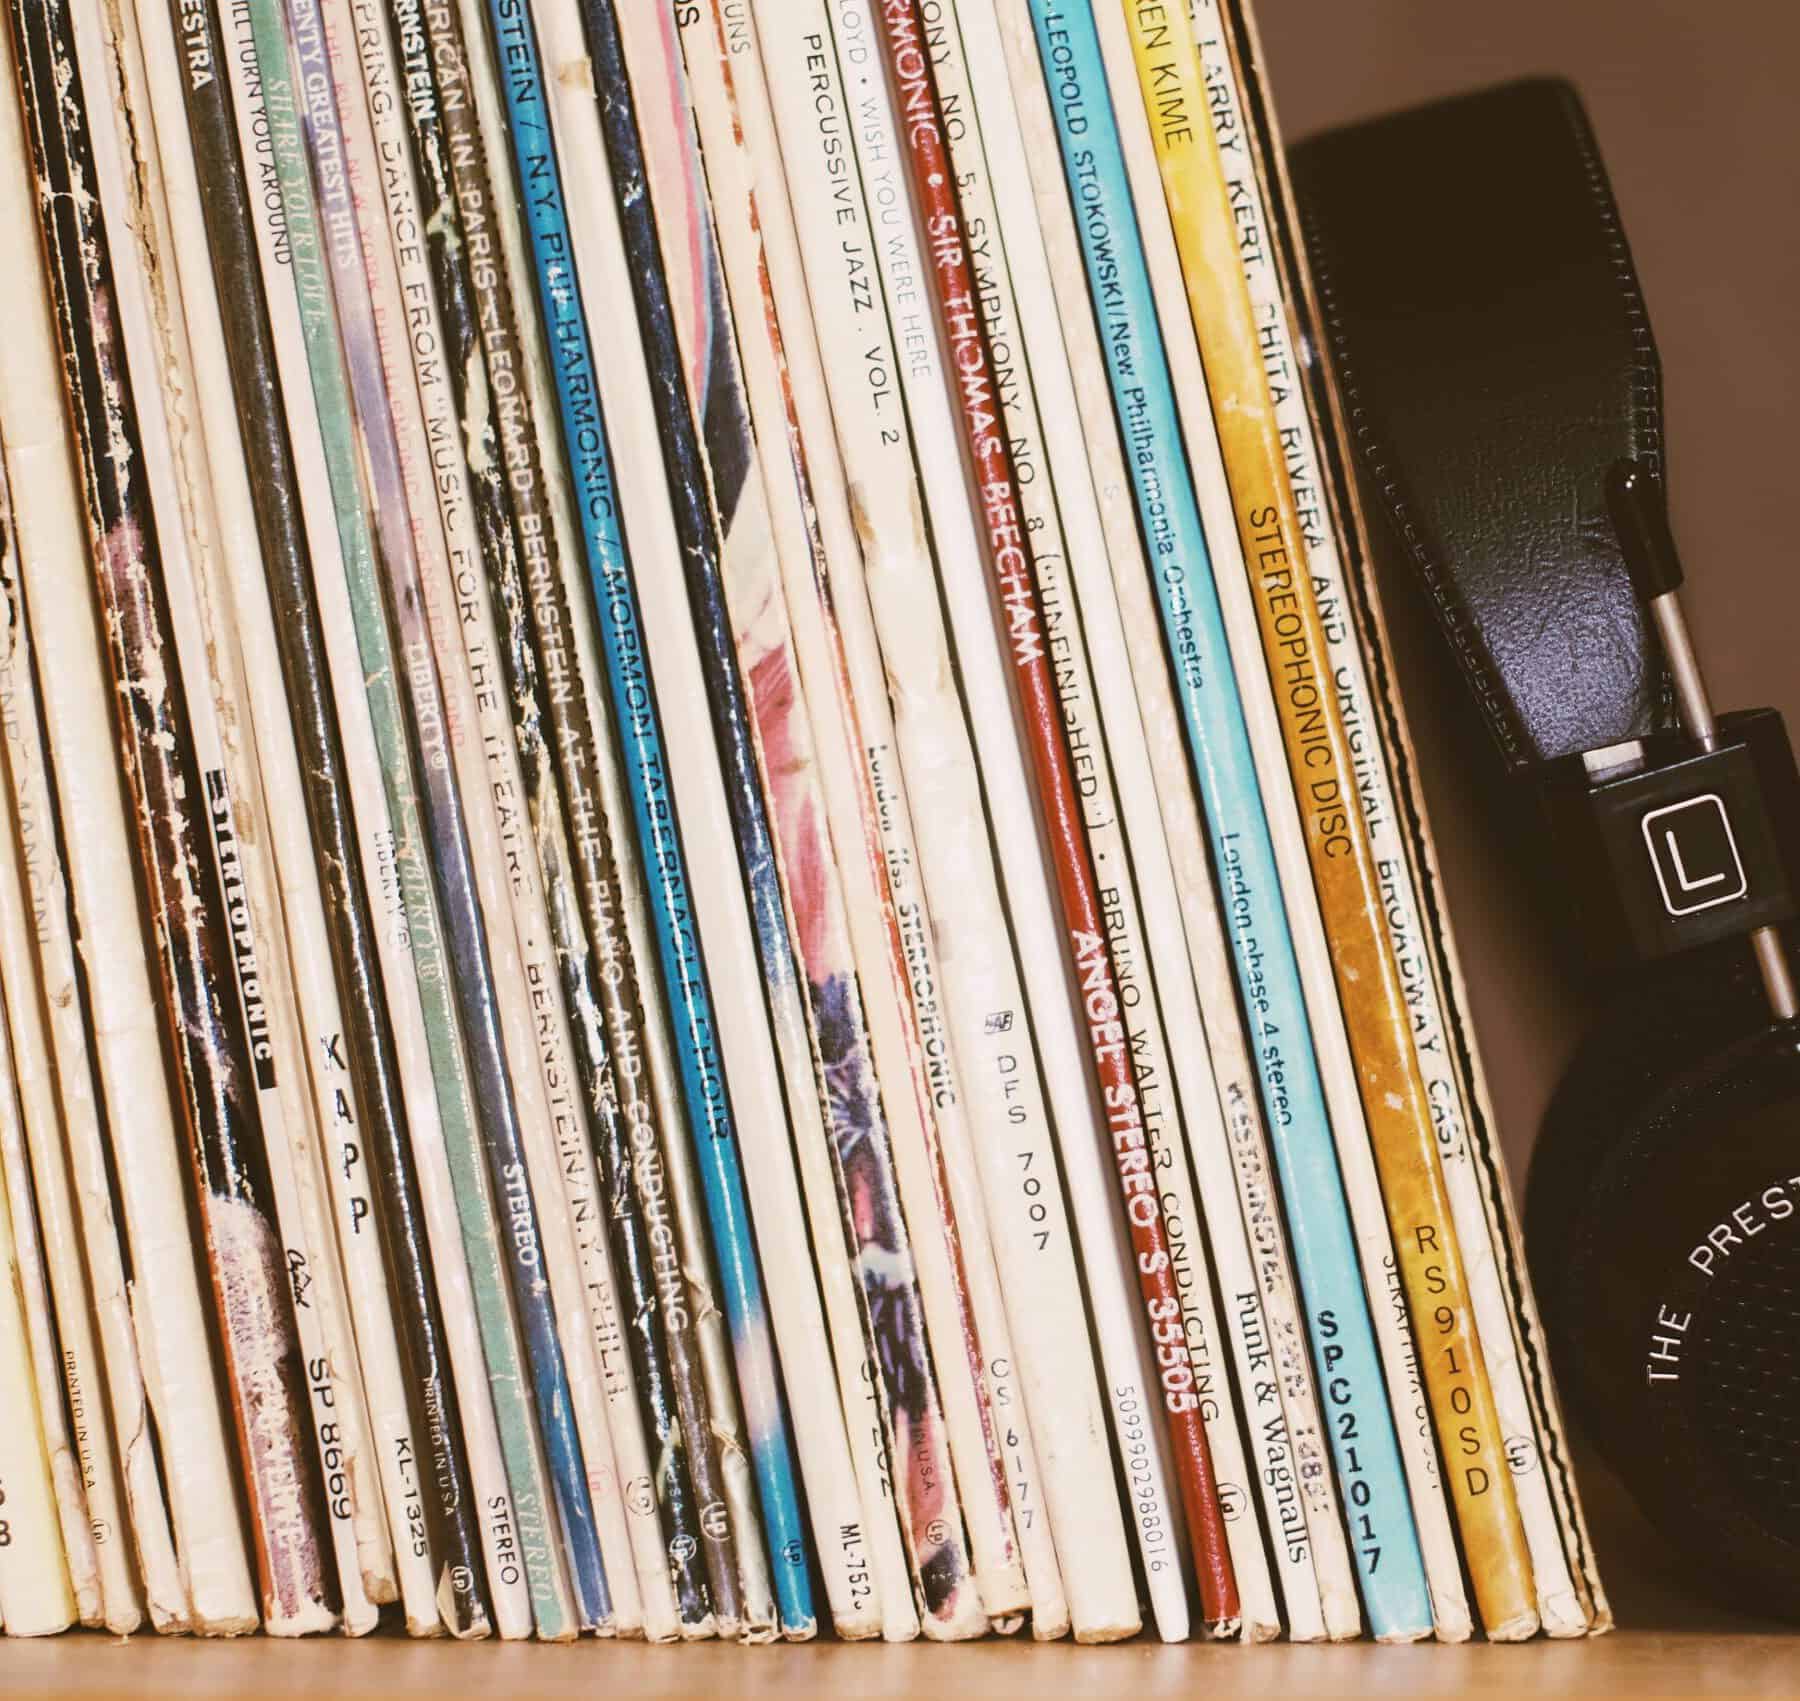 the image shows a stack of vintage vinyl records sitting upright on a brown shelf. there is a pair of over ear black headphones on the right of them.